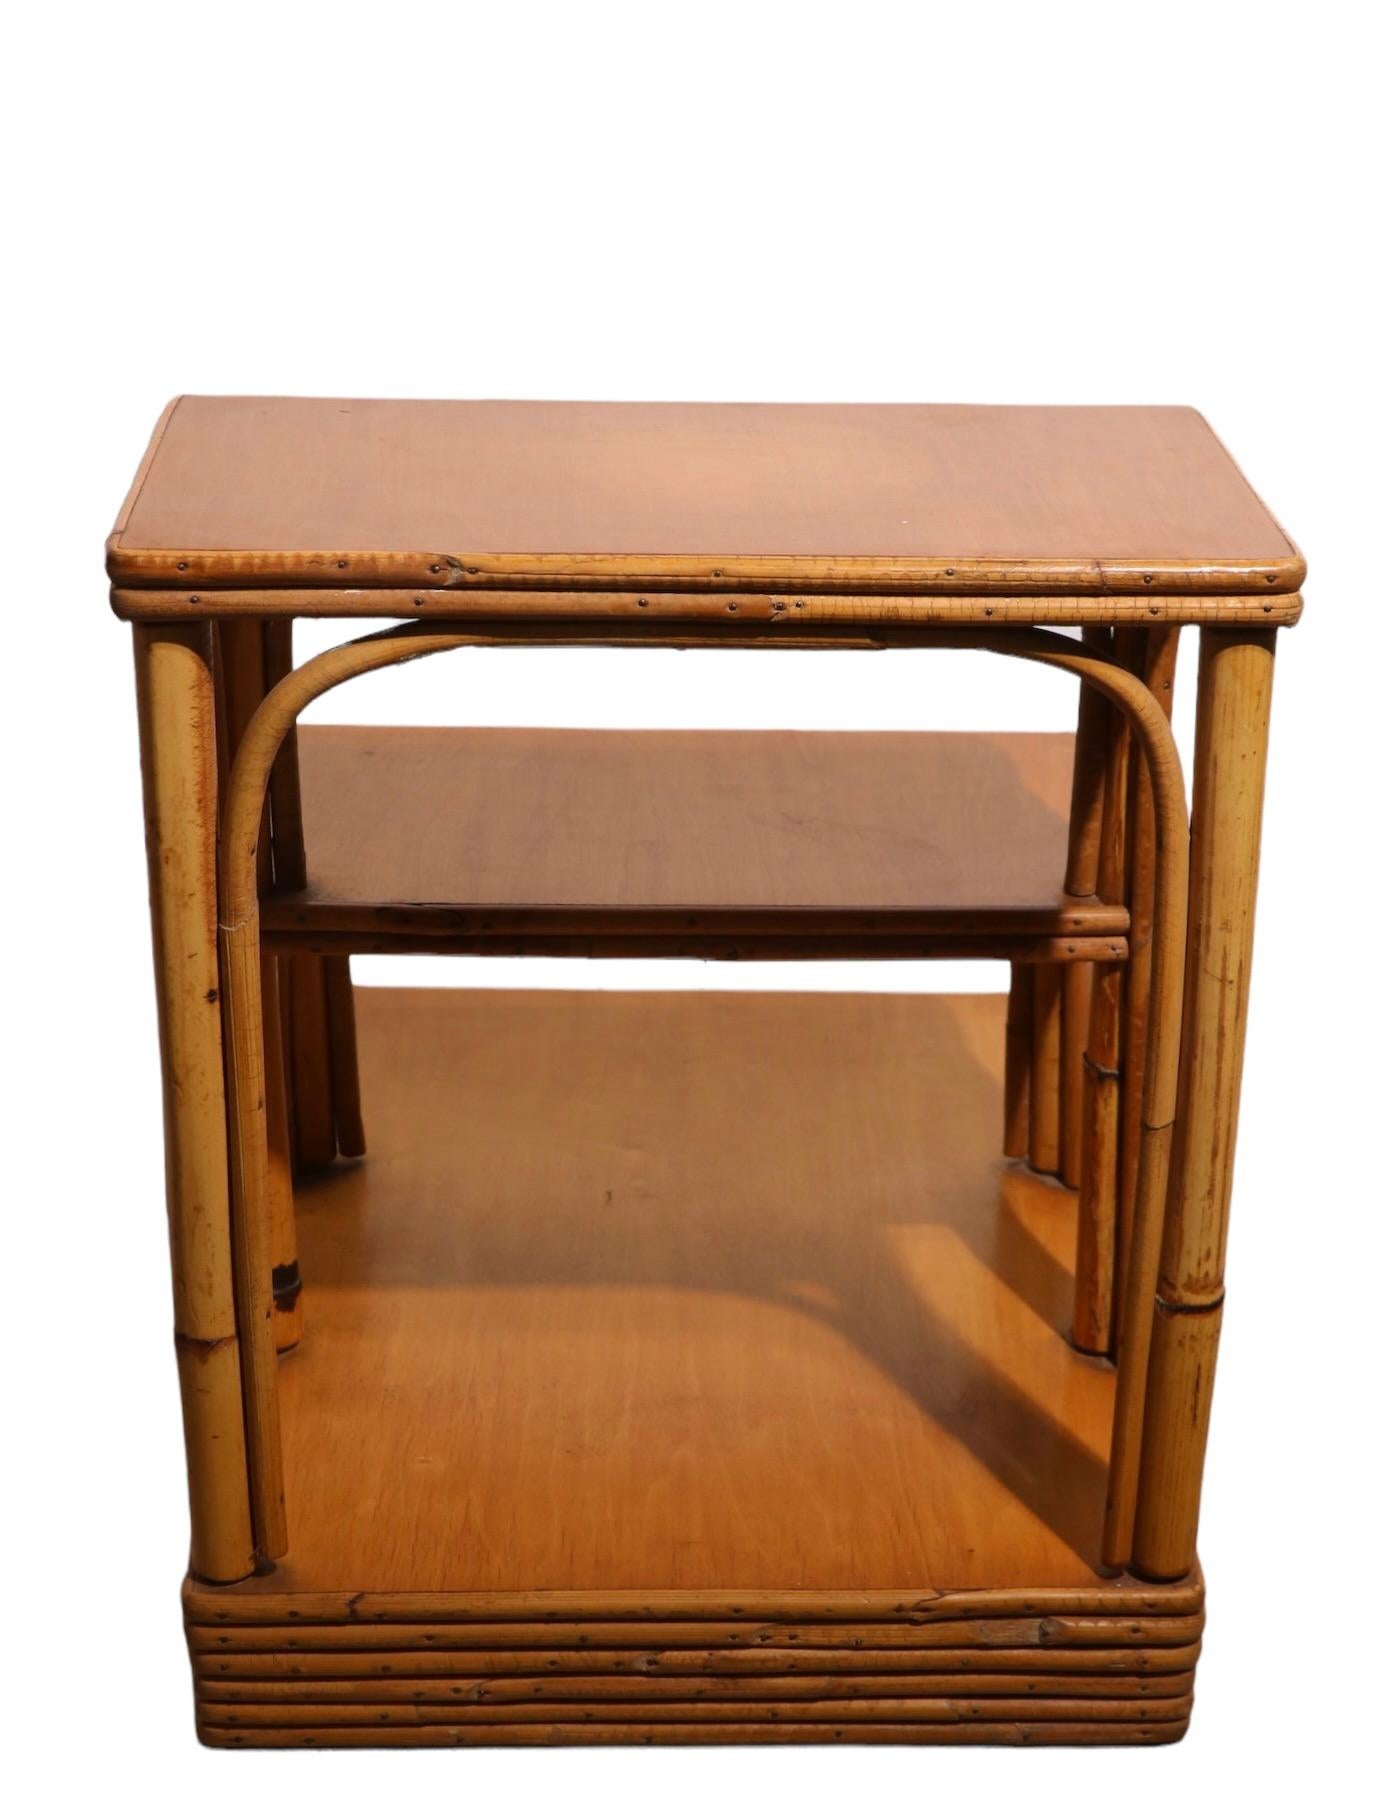 Chic pair of bamboo step end tables by noted the American furniture company Ficks Reed. Each table has a banded bamboo base, with three graduated tiered shelves. Known for top quality craftsmanship, and high style design, Ficks Reed produced high